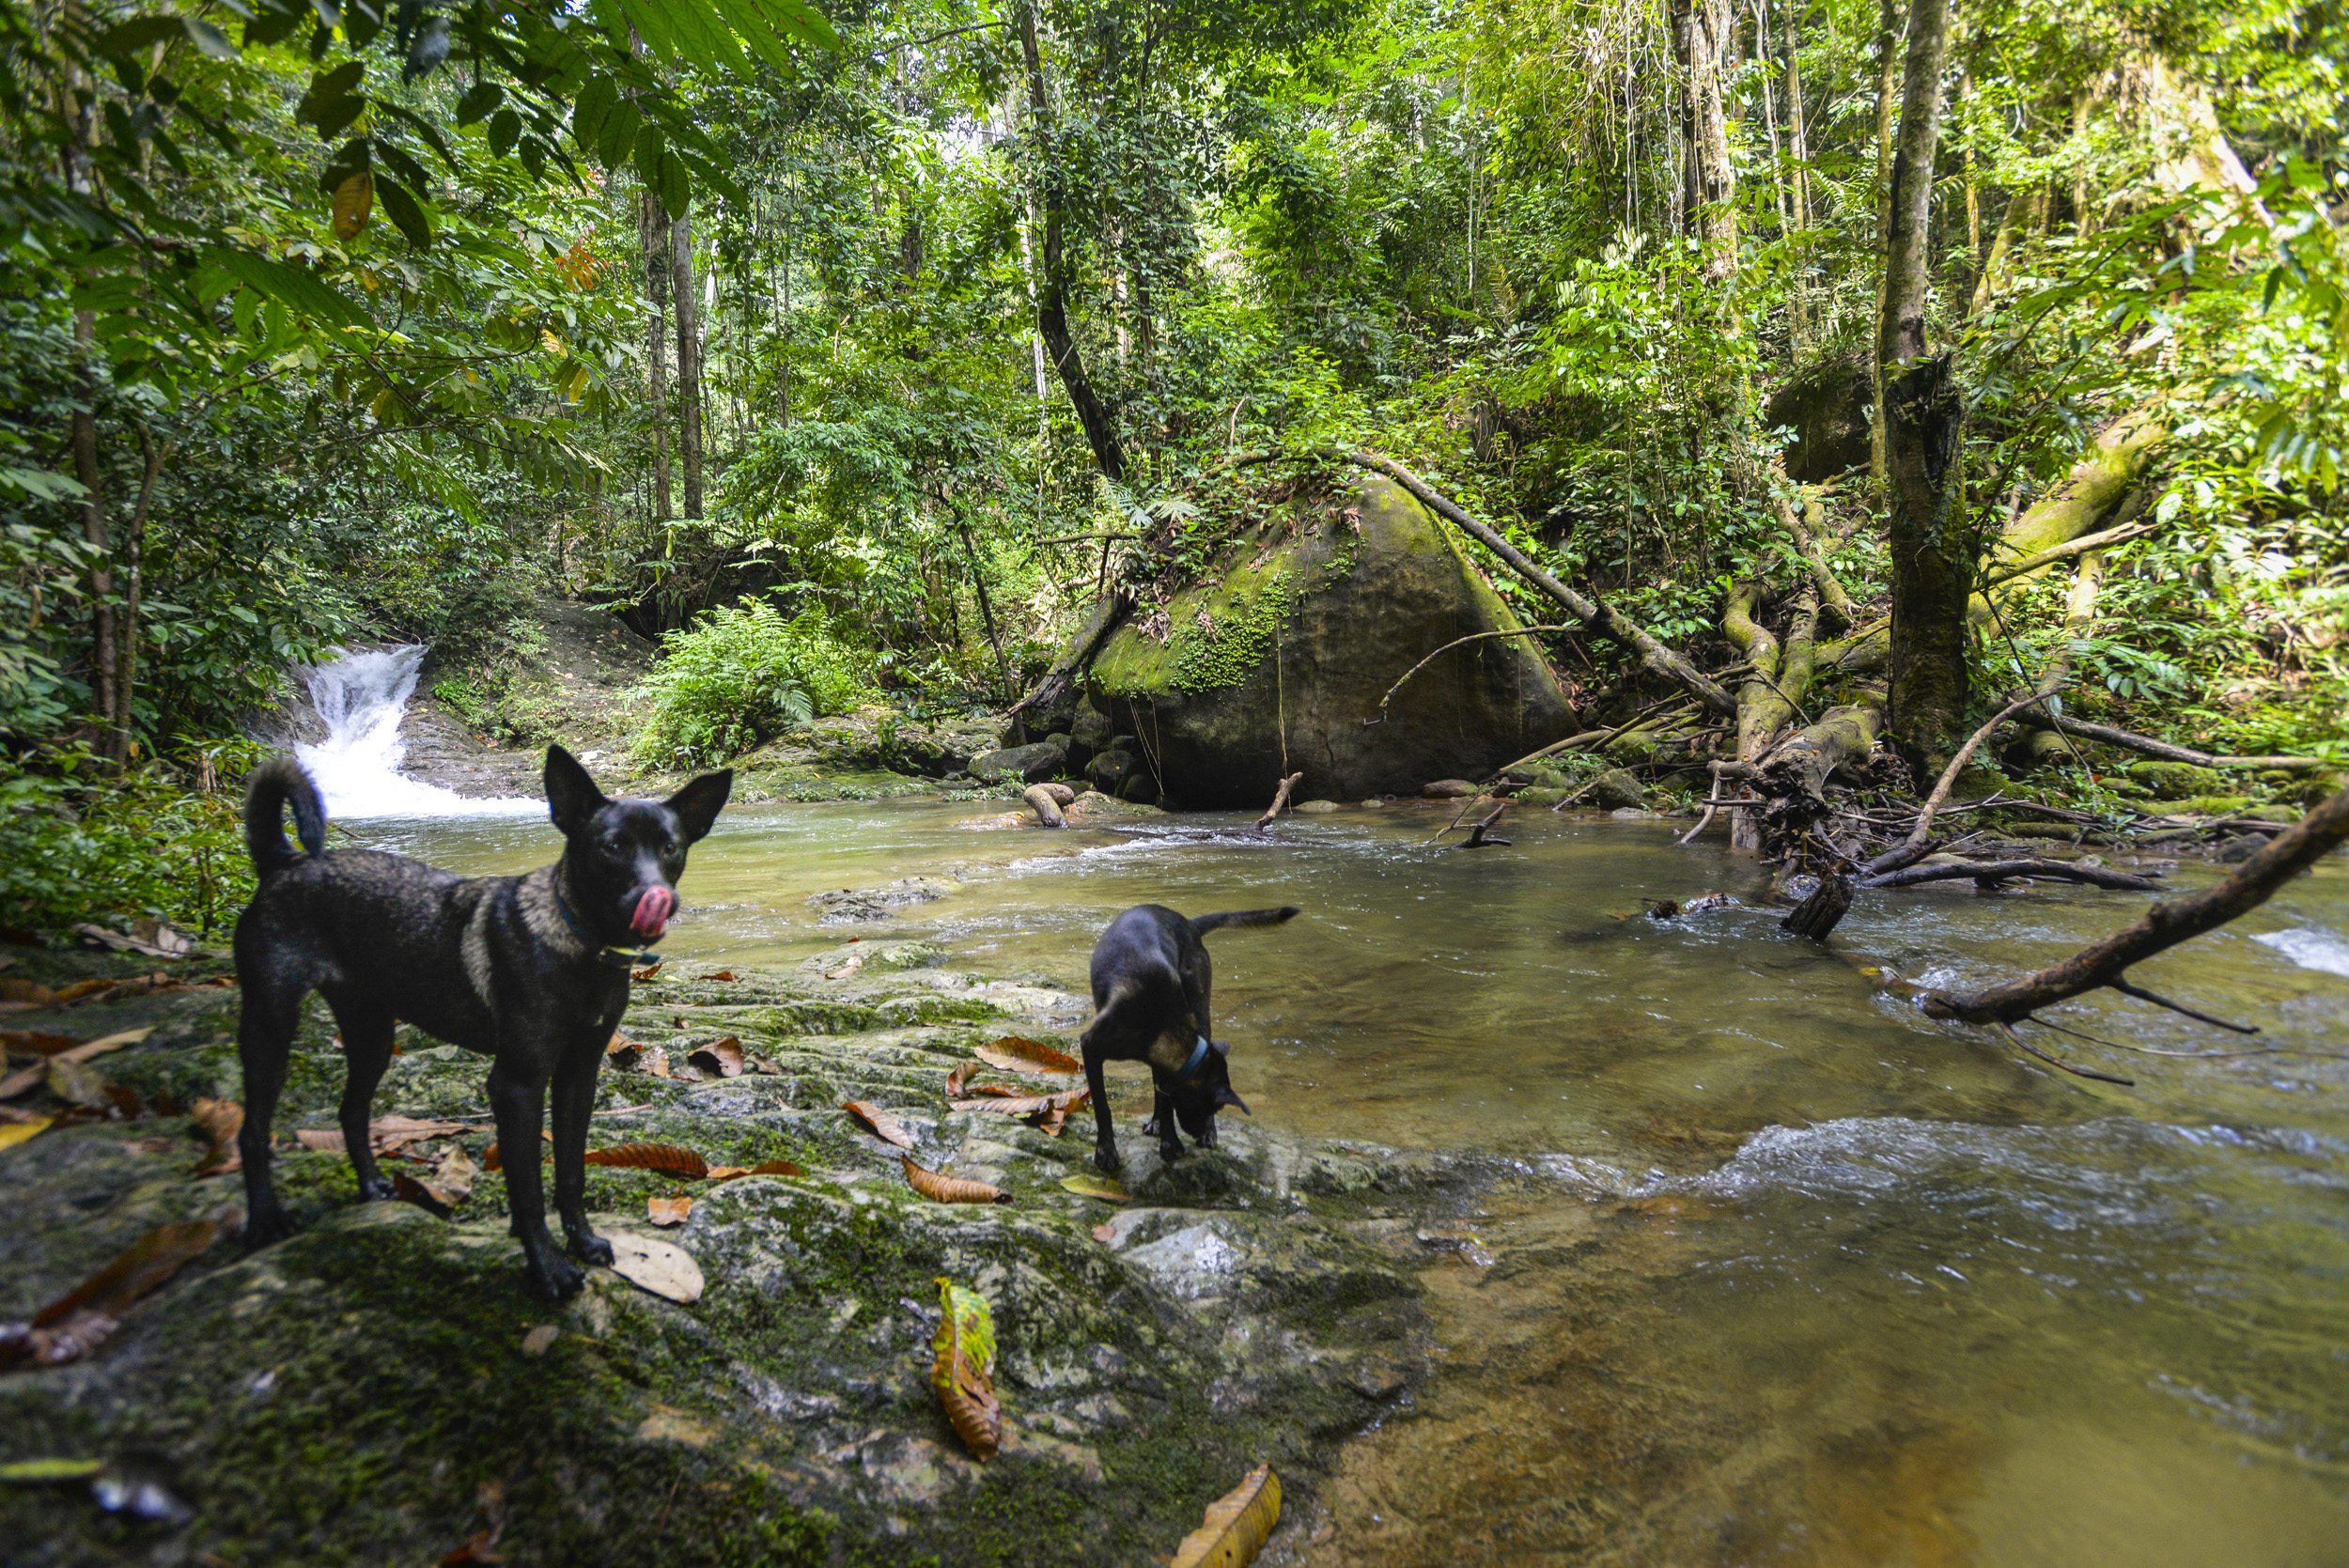 Donnie and Darko Spyder Hill's resident dogs playing by the river, inside the Berembun Forest Reserve.